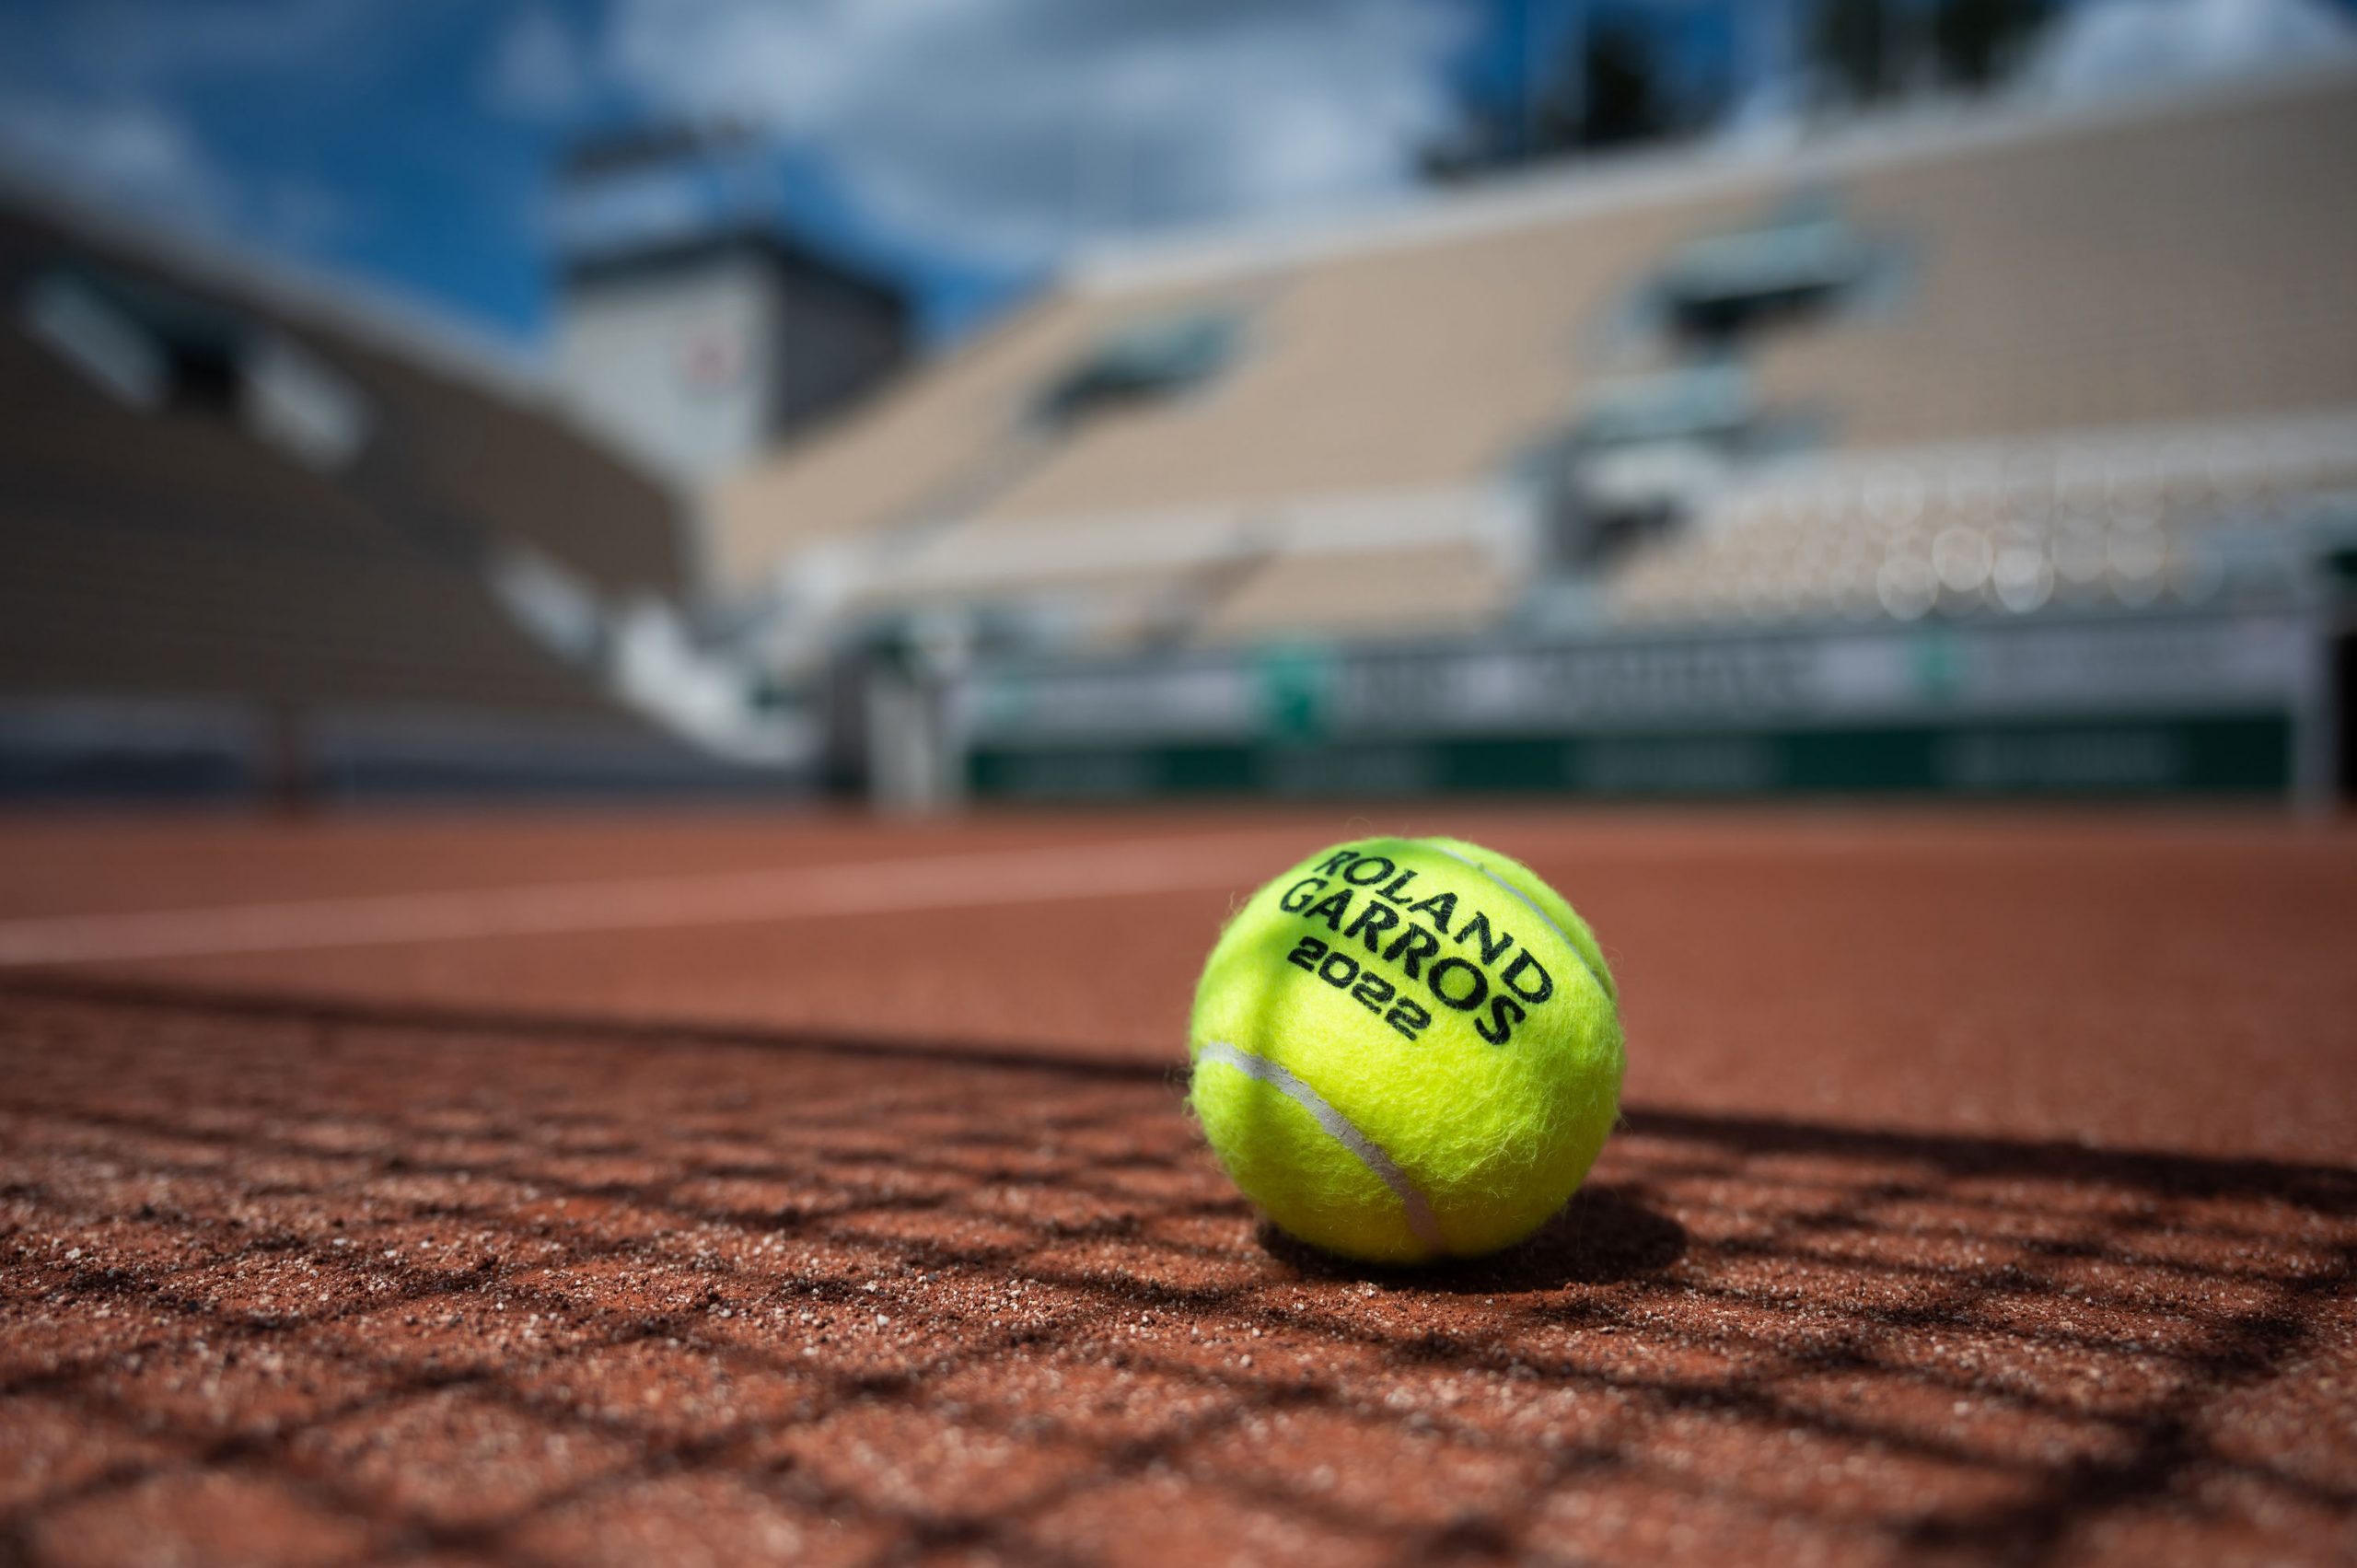 French Open 2022: All you need to know about the upcoming Grand Slam